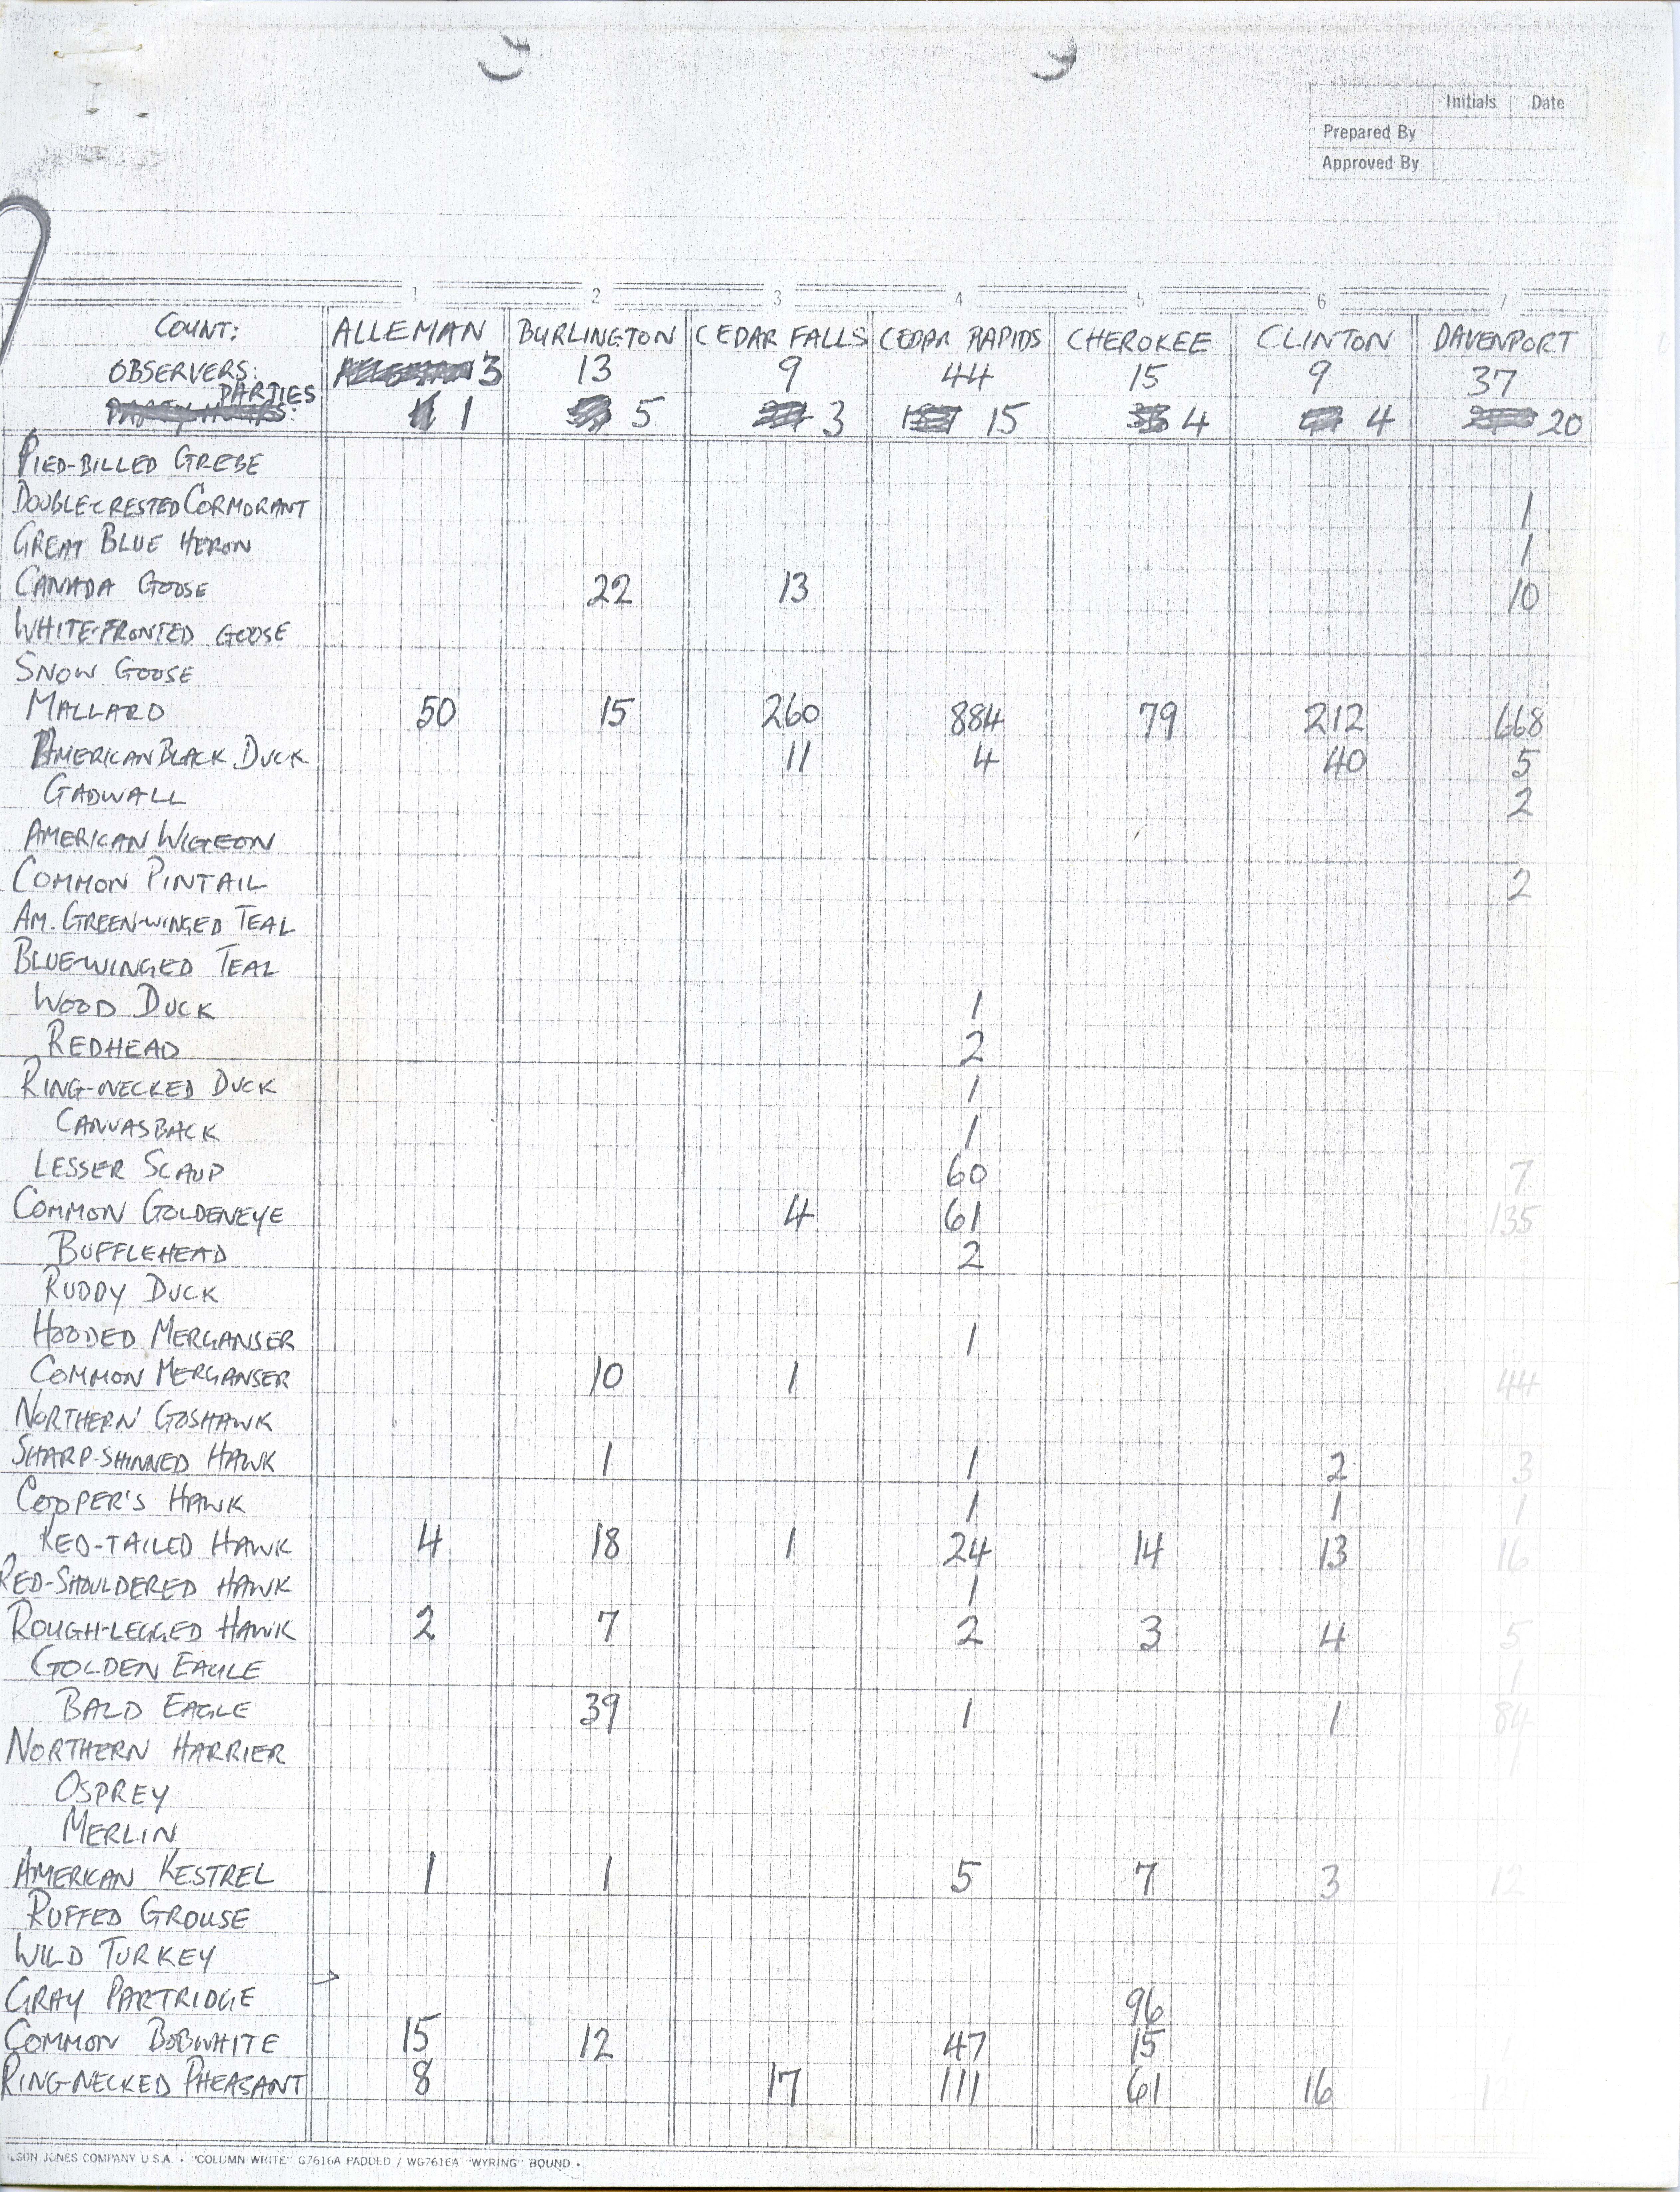 Bird sightings and count table, winter 1978-1979